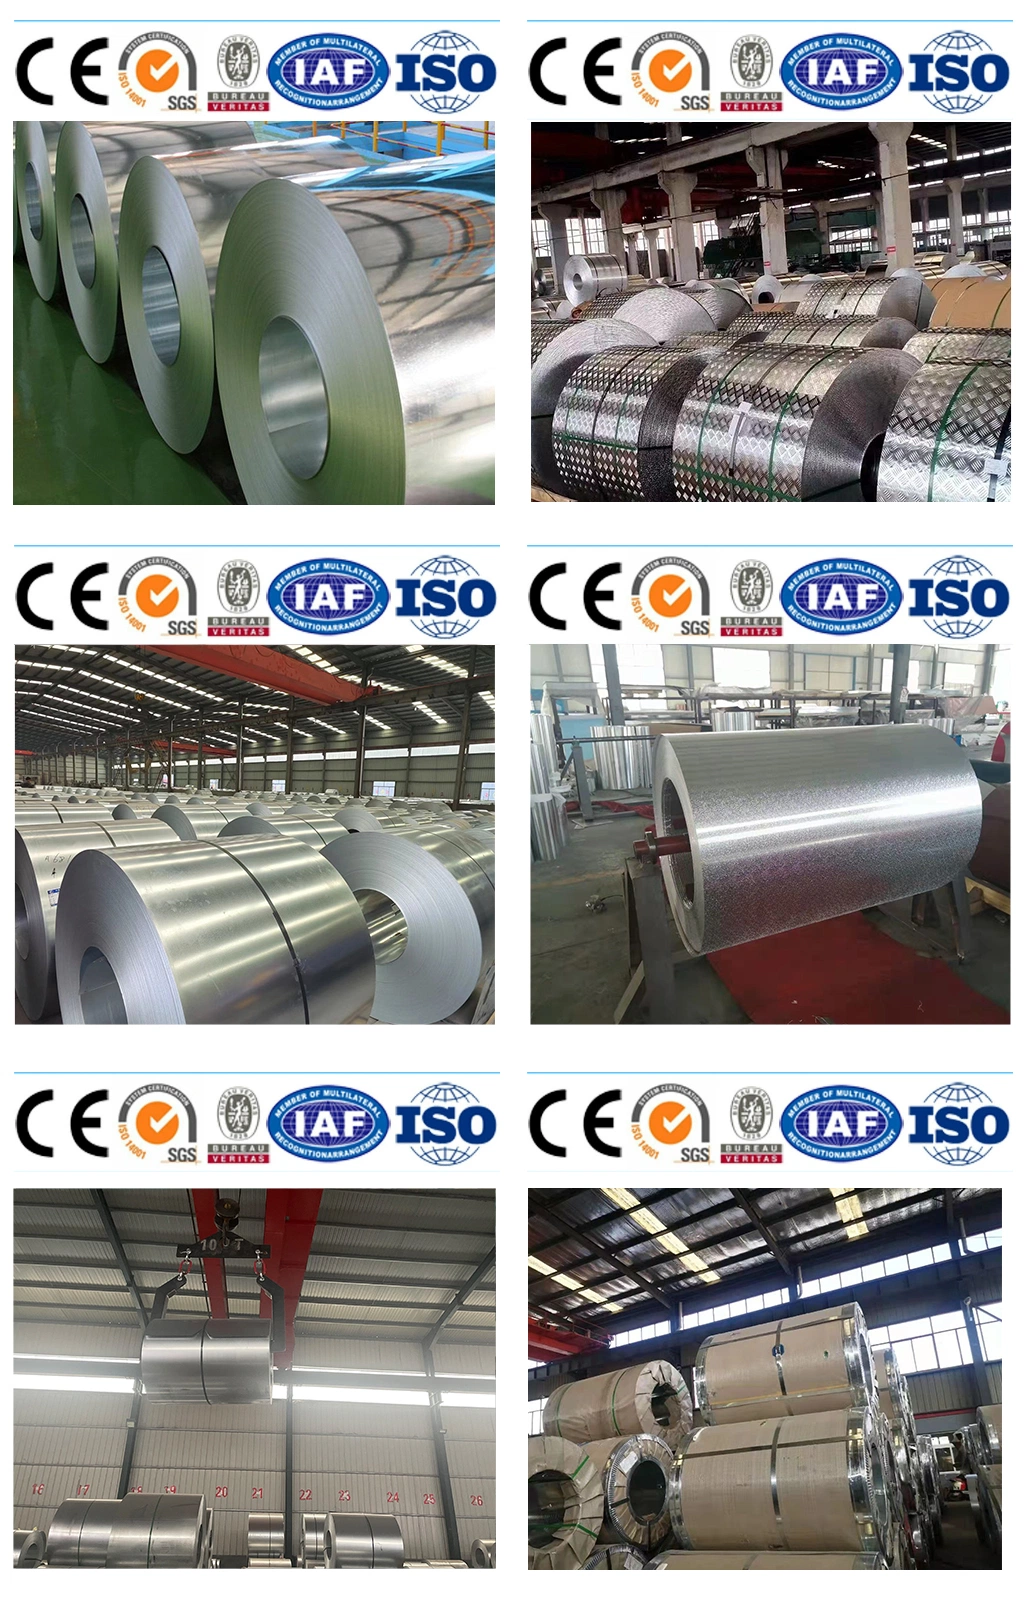 Hot Sale Galvanized Steel Coil From Wuxi Qifa Factory Hot Dipped Galvanized Steel Coil